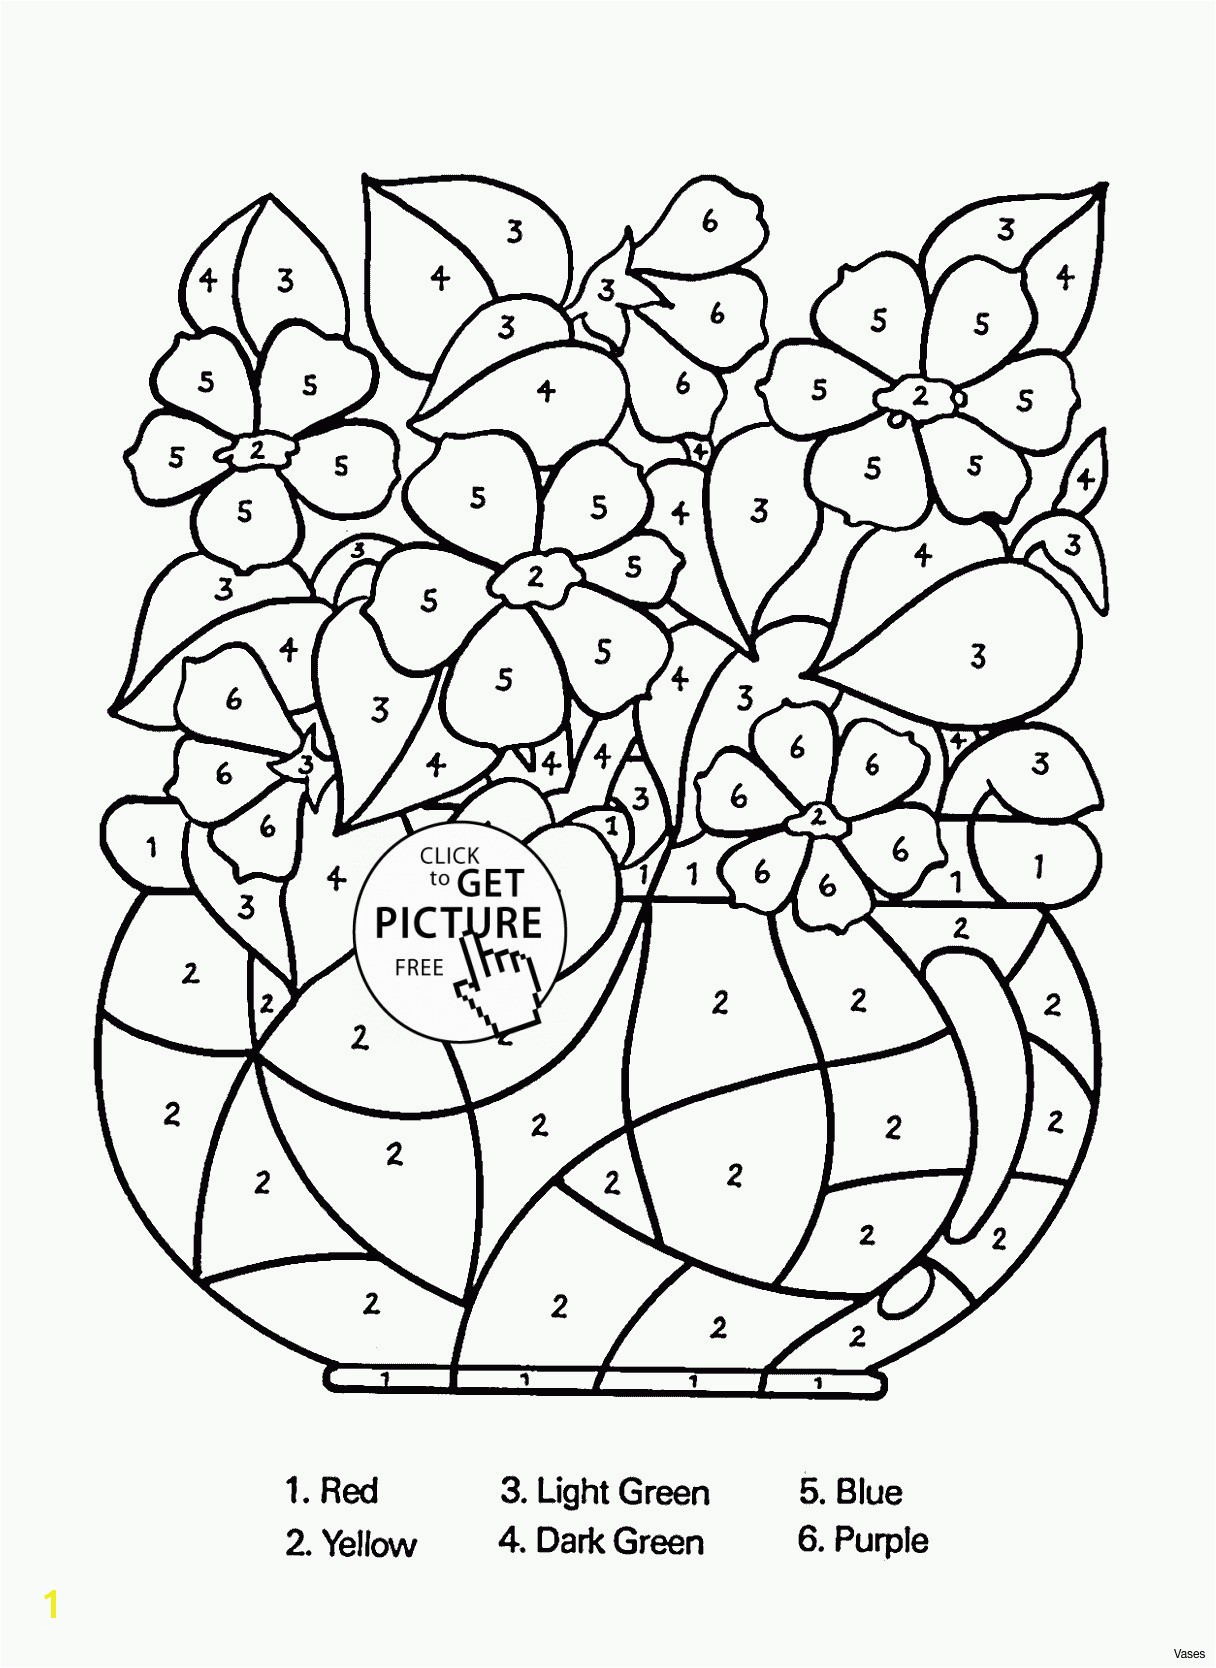 Coloring Book Pages Of Babies Inspirational Coloring Book Pages Babies Flower Coloring Pages